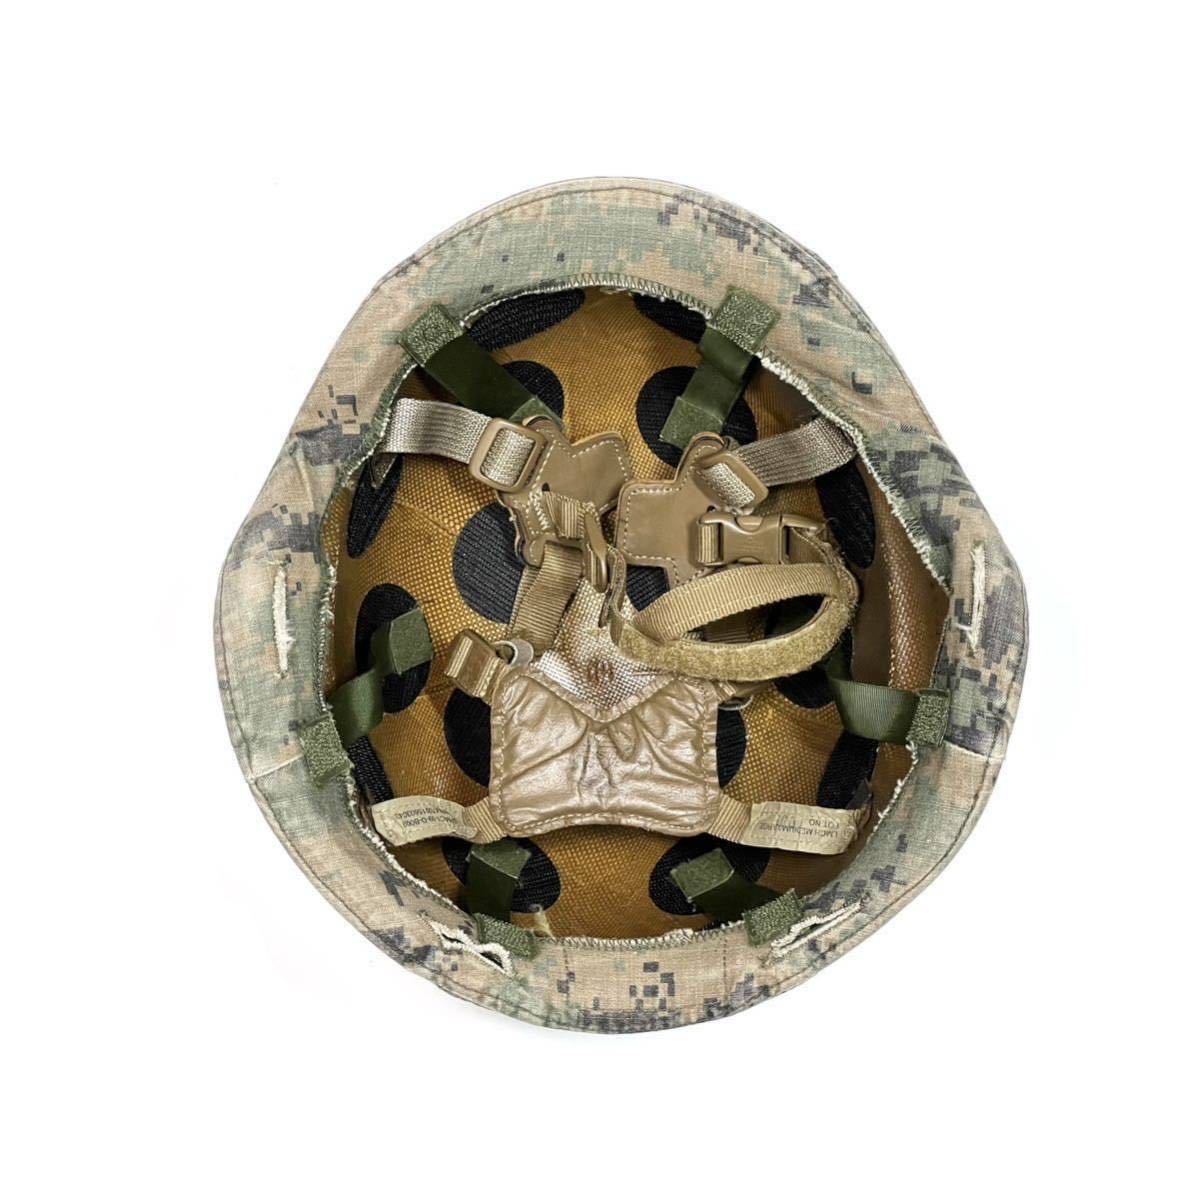 USMC LWH (PASGT) L ( inspection the US armed forces the truth thing discharge goods sea .. helmet cover olive gong b coyote Brown MARPAT WL OD ACH SPC ECH MCPC